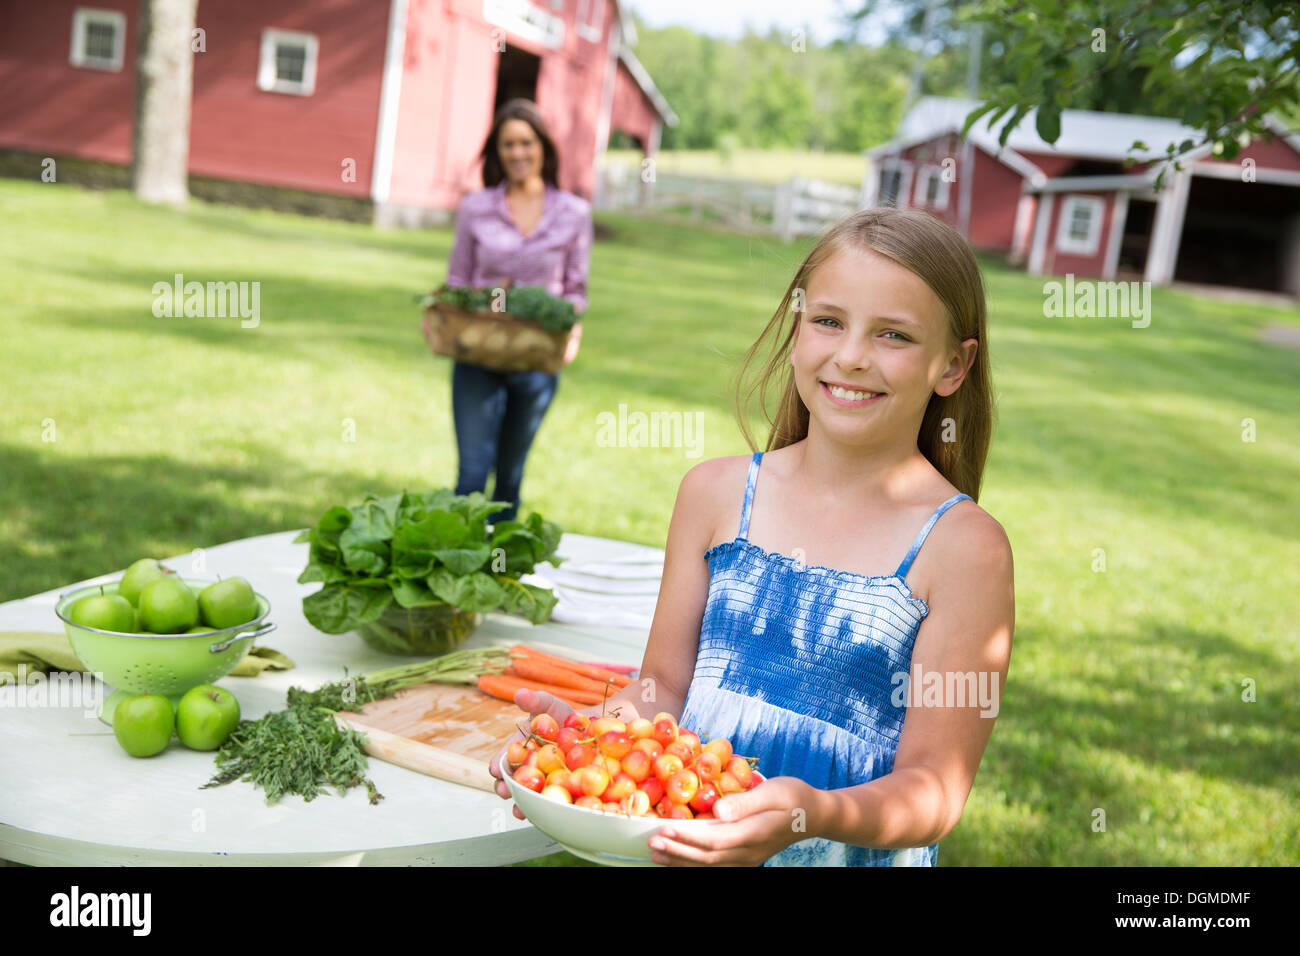 Family party. A child carrying a bowl of fresh picked cherries to a buffet table. Stock Photo